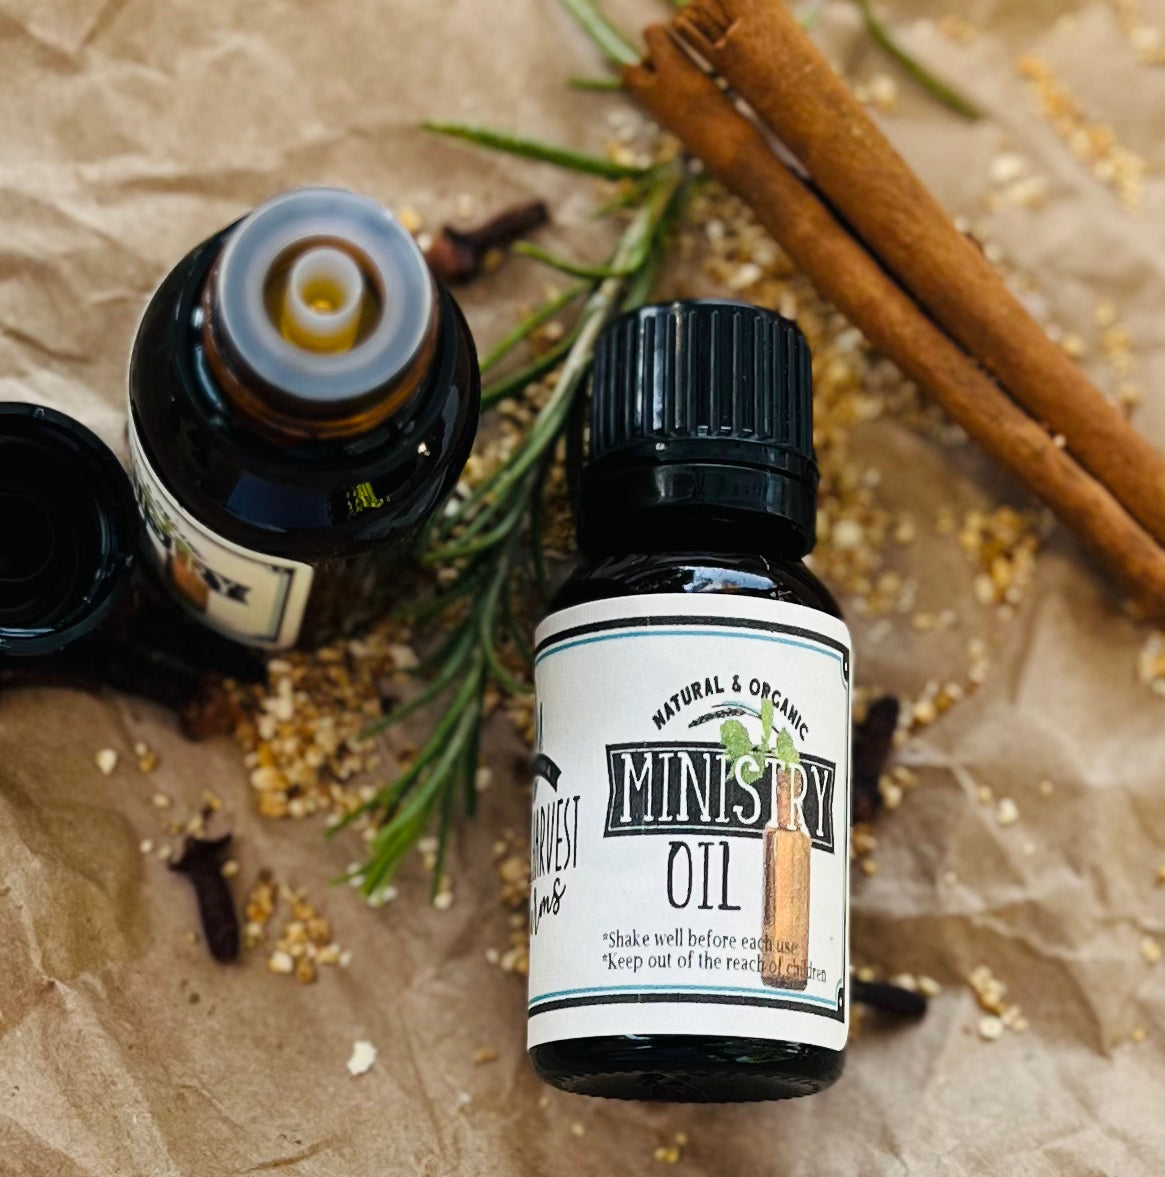 Our Ministry Oil is our reformulation of Thieves Oil. Sweet Harvest Farms Thieves oil is uncut and has an amazing aroma! Better than Thieves oil this can stop the norovirus in its tracts!